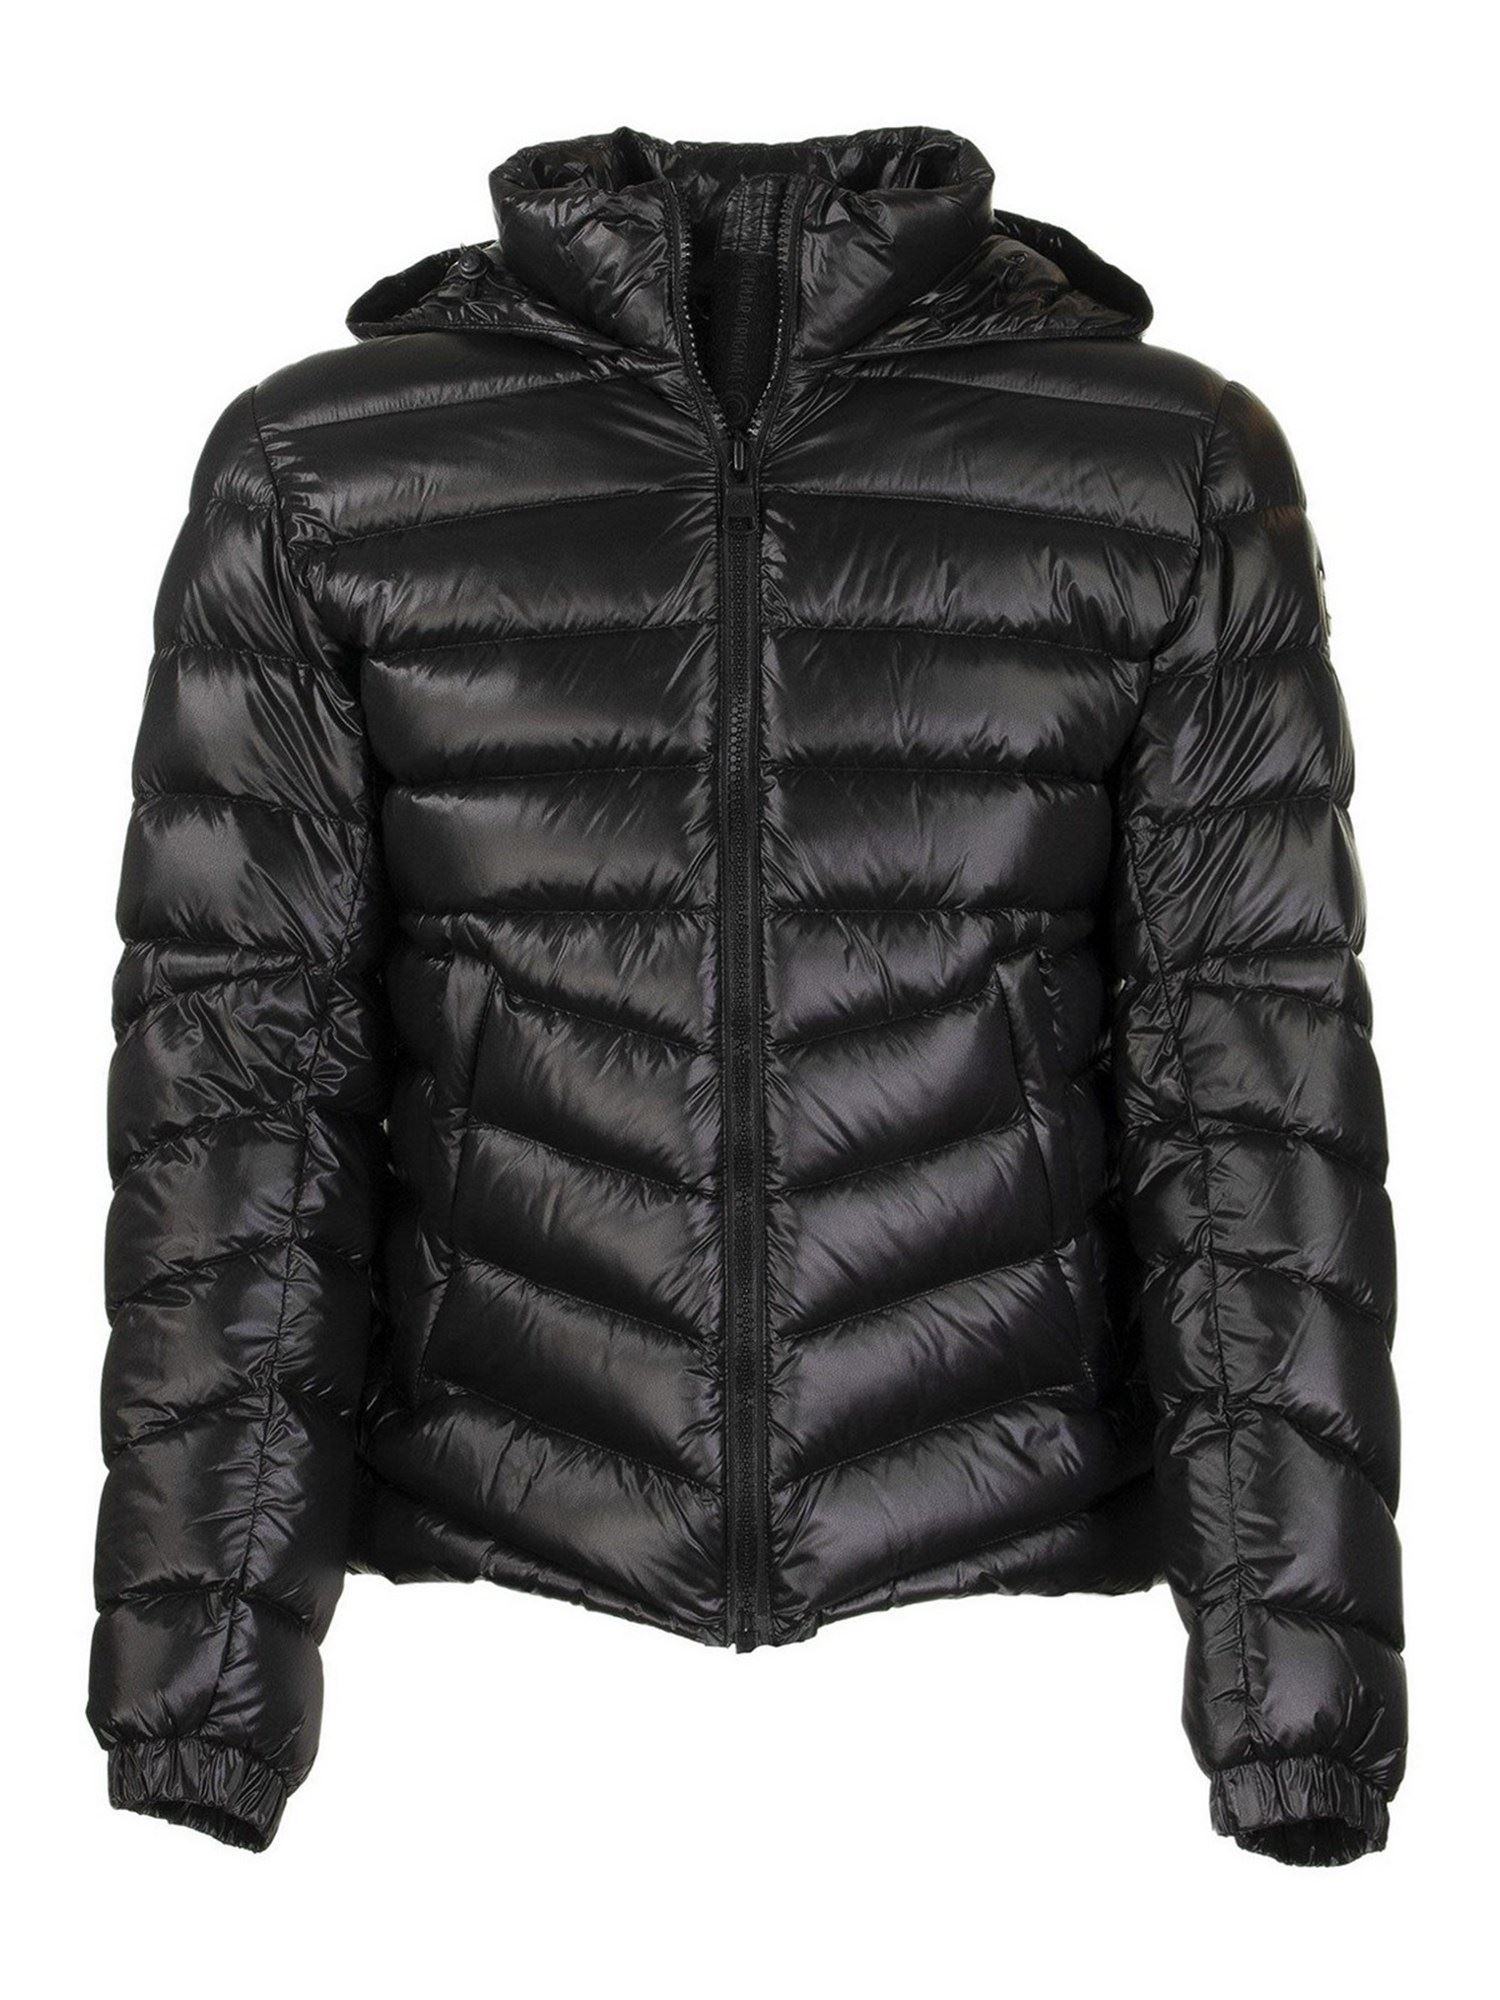 Colmar Synthetic Quilted Nylon Puffer Jacket in Black for Men - Lyst